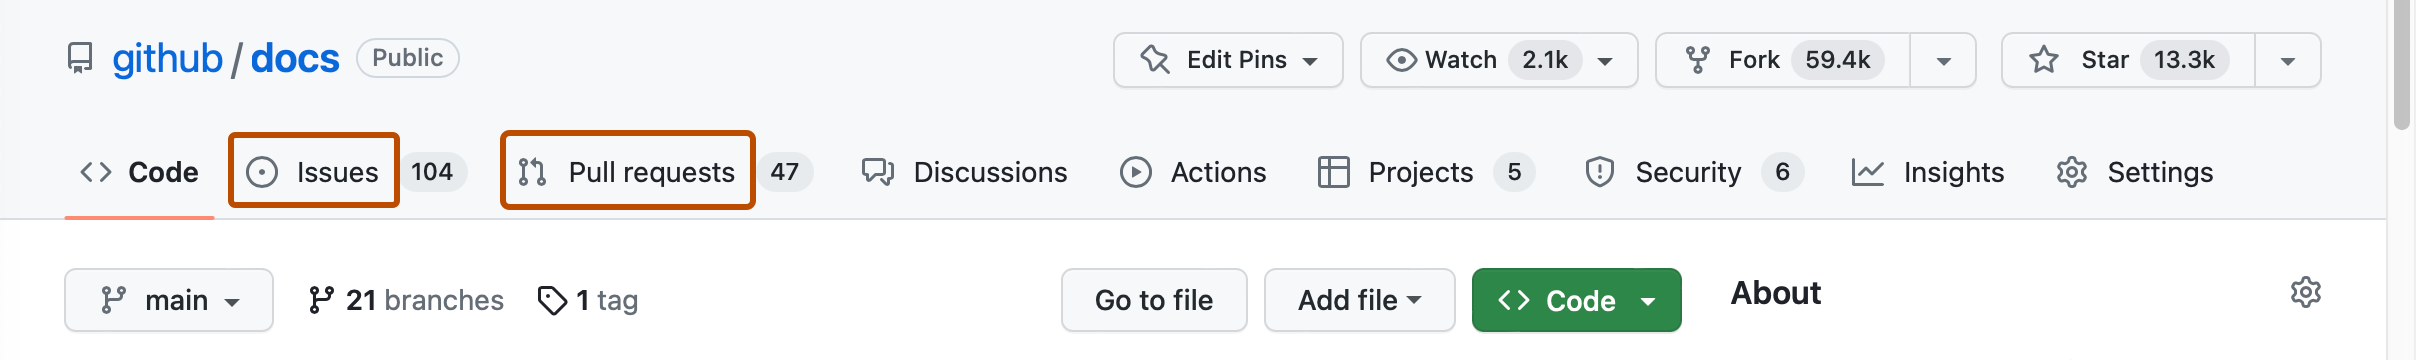 Issues and pull requests tab selection